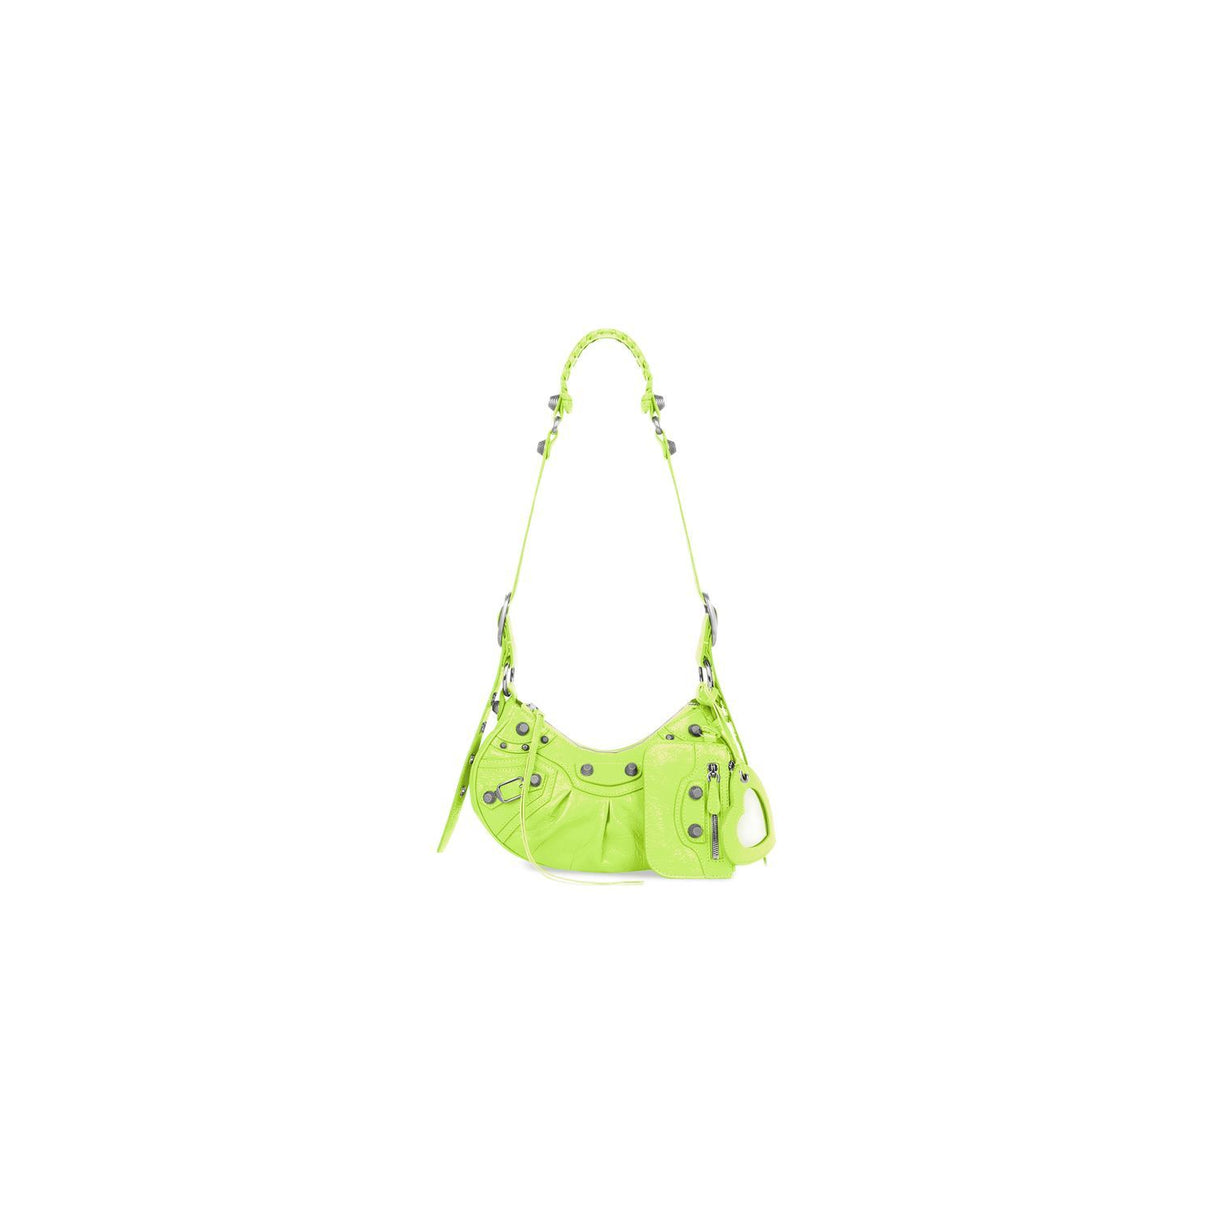 Neon Yellow Crossbody Handbag (in 100% Lambskin Leather) with Detachable Pouch and Mirror